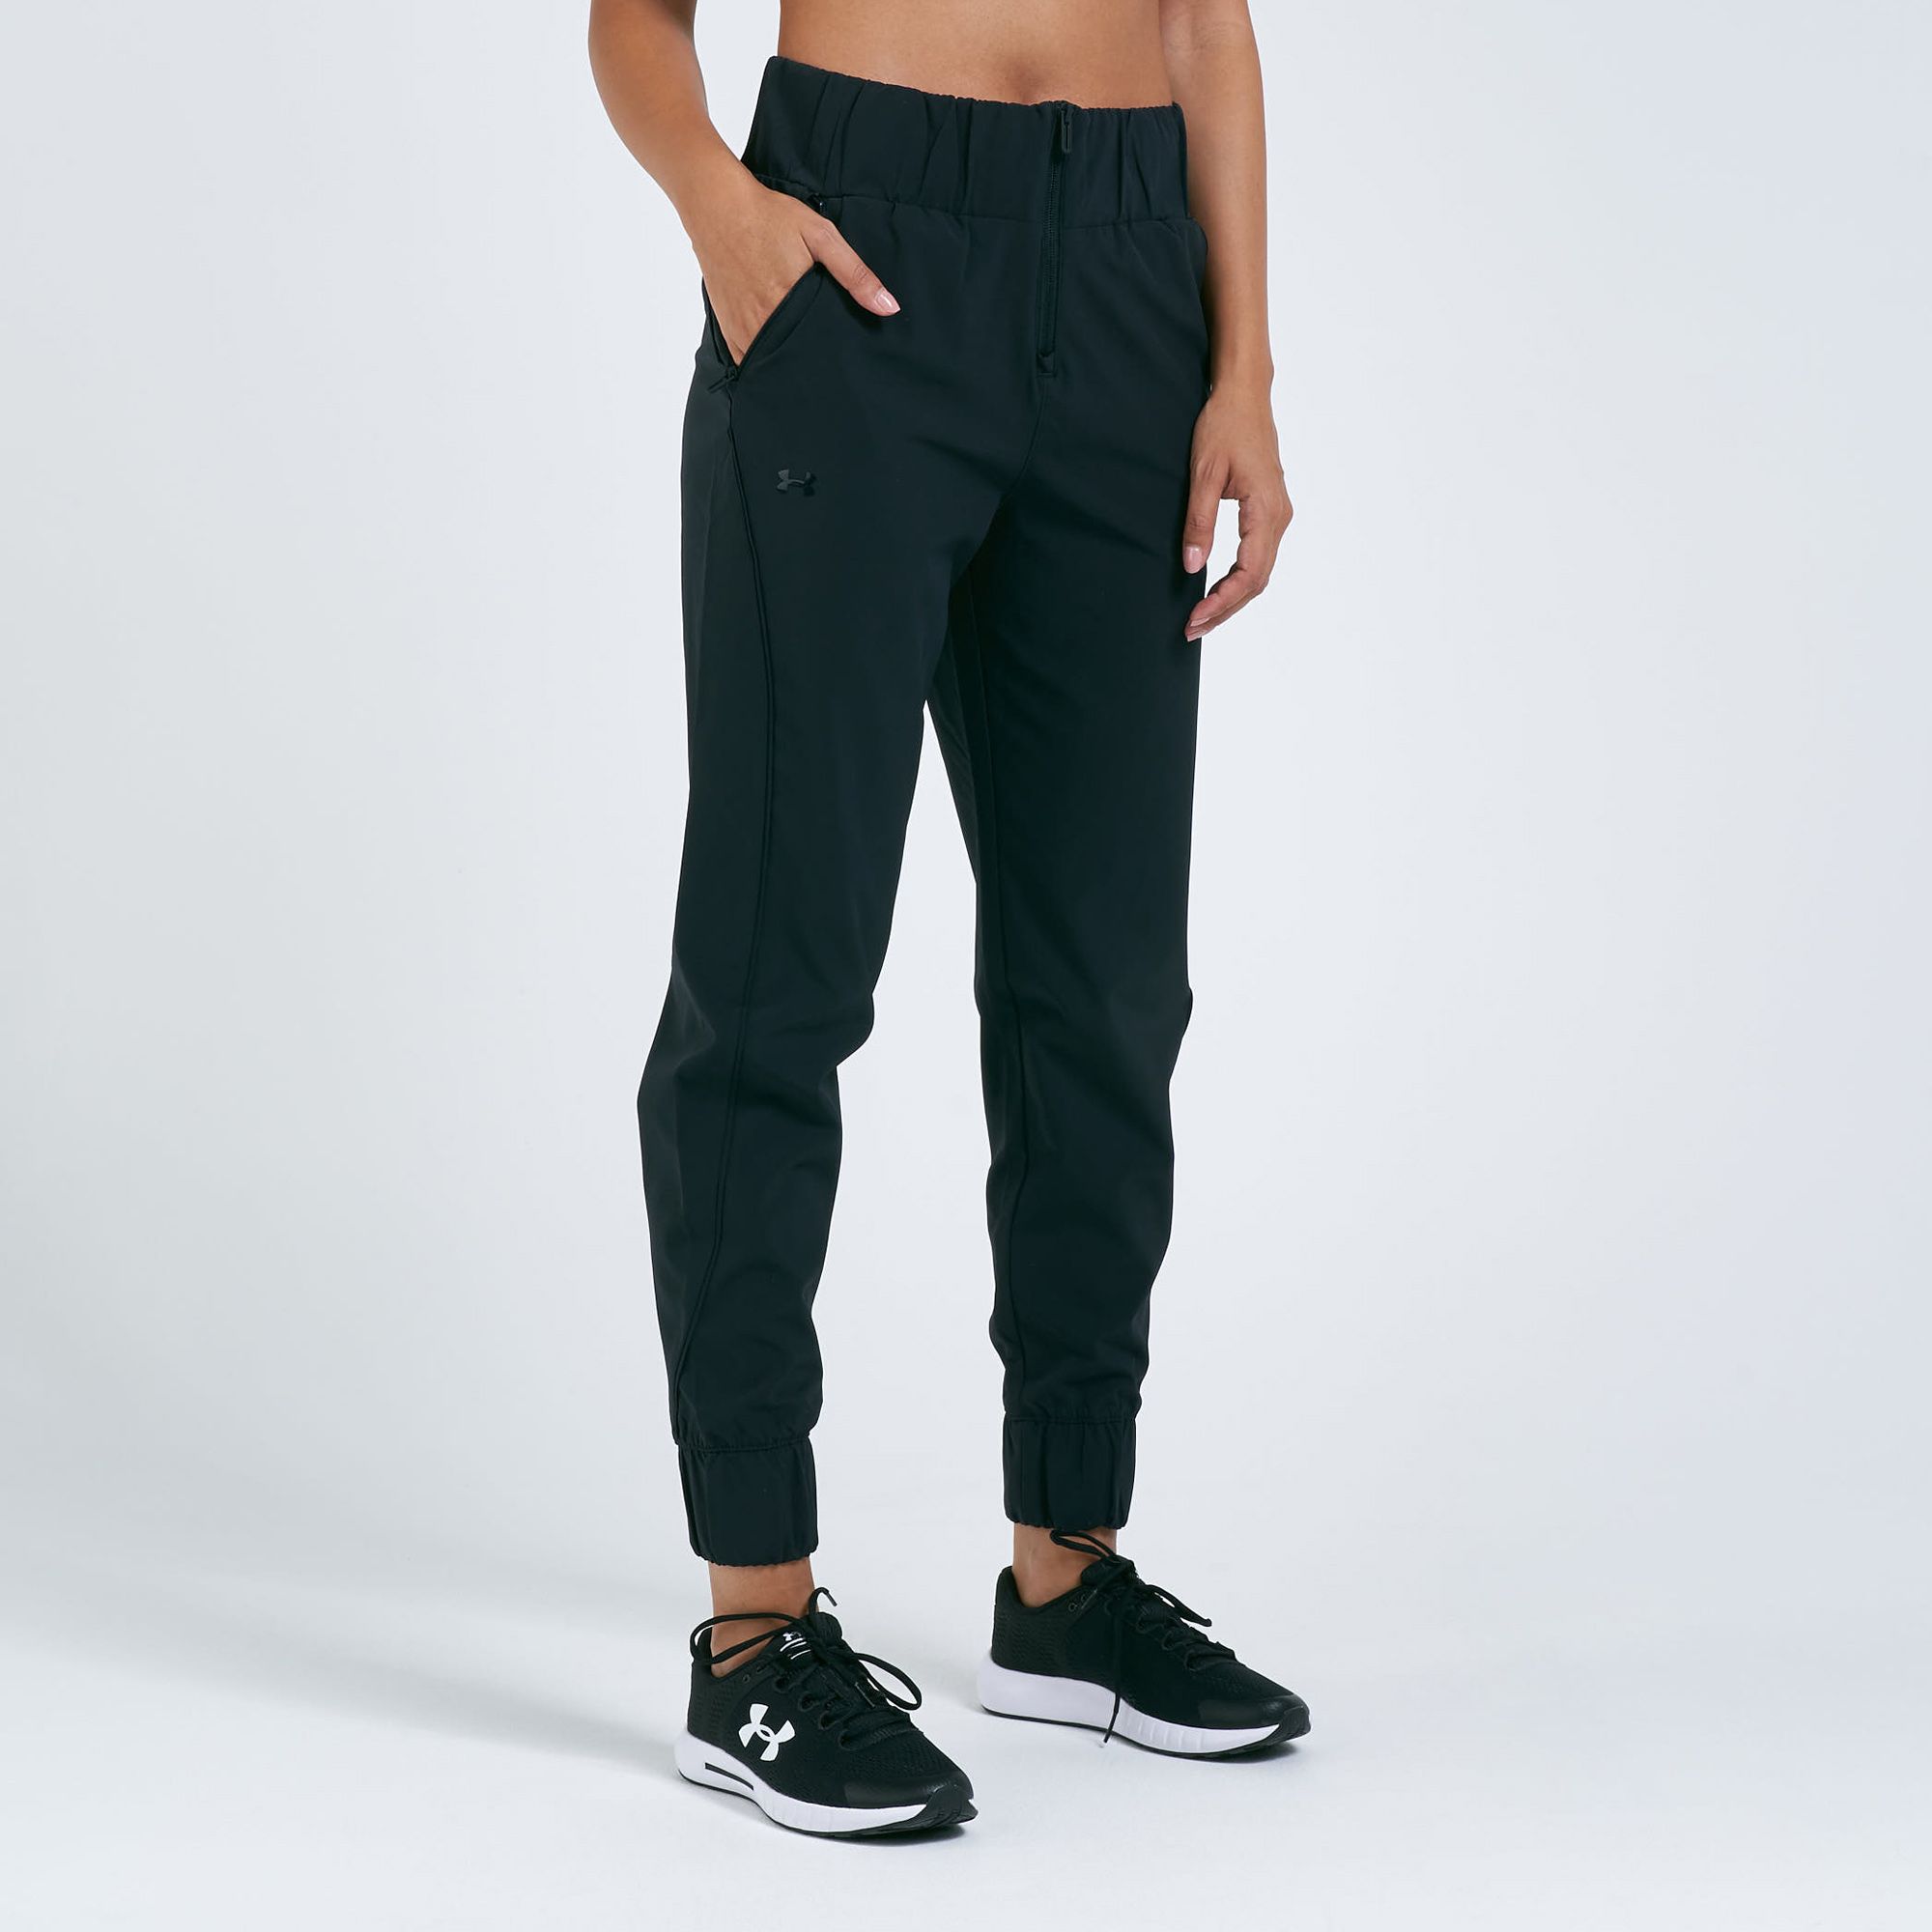 Buy Under Armour Women's Unstoppable Woven High-Waist Storm Pants ...